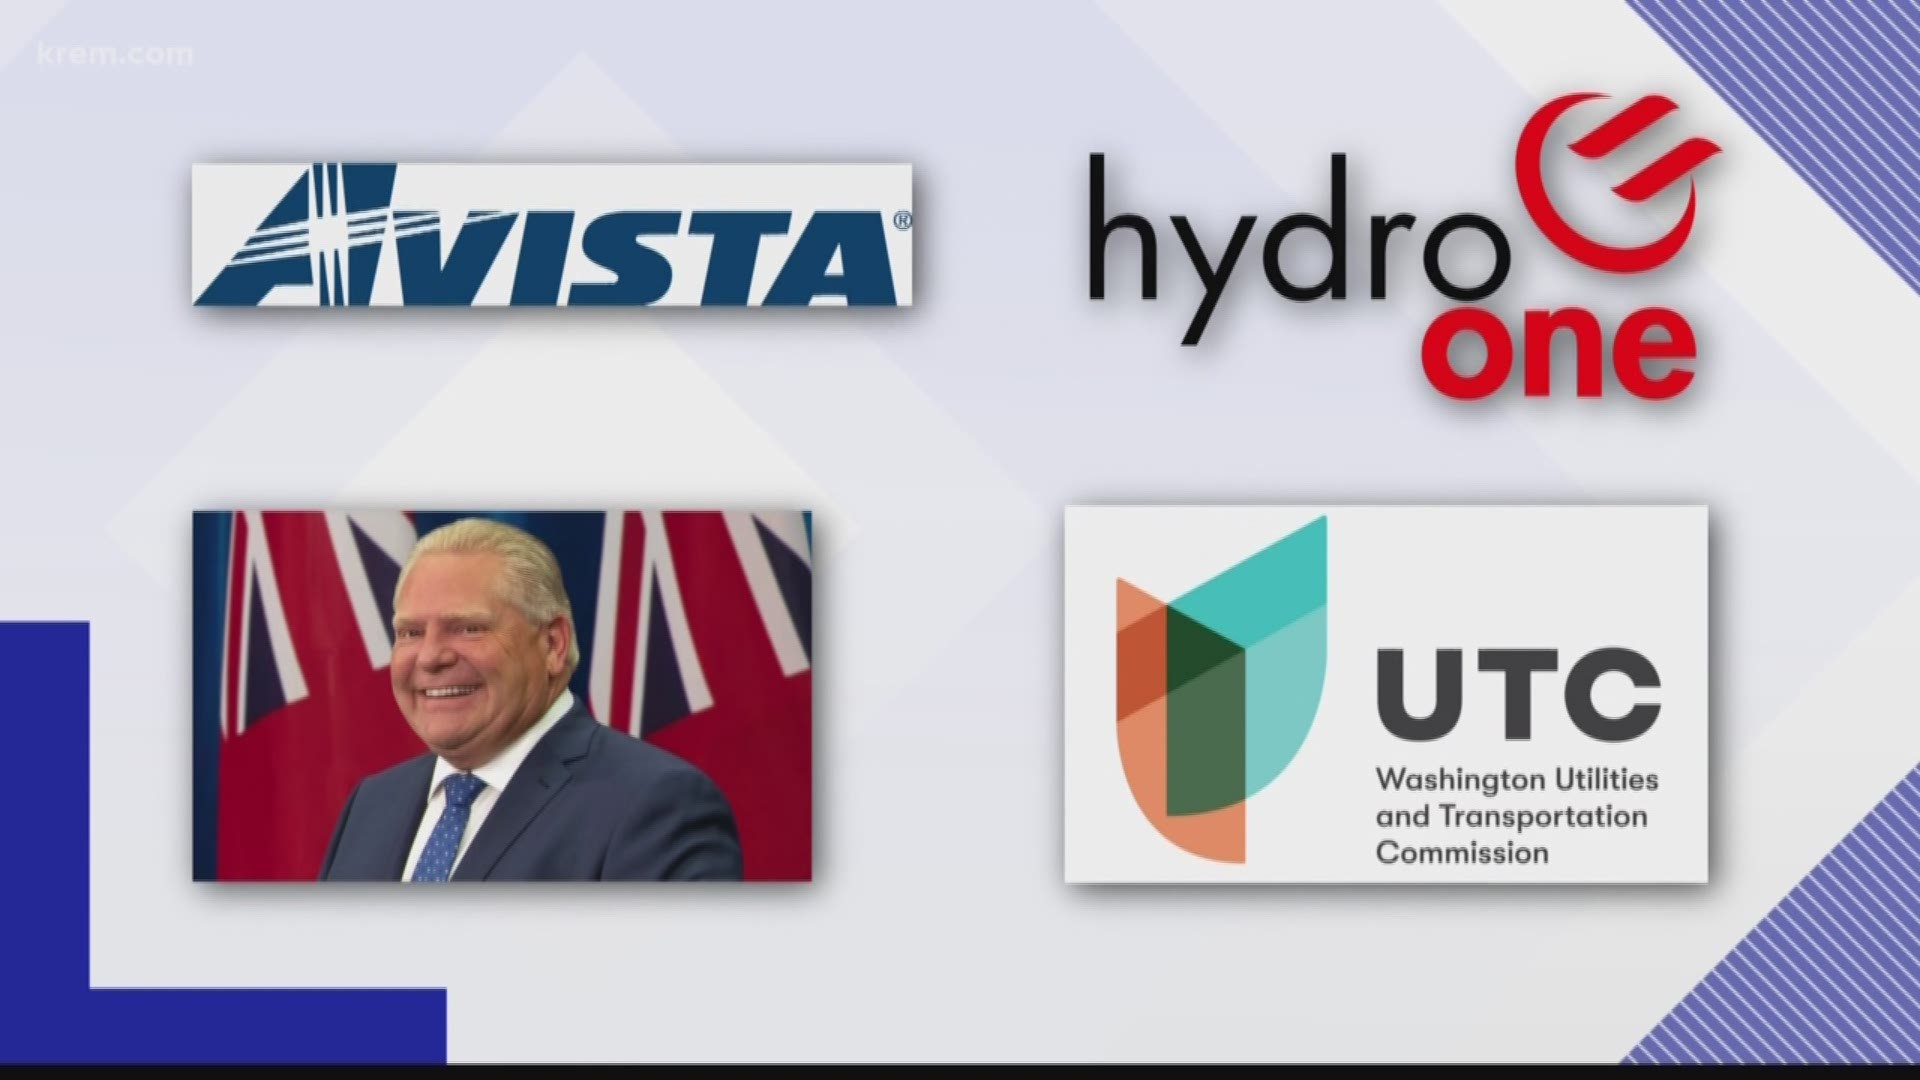 Avista announced late Monday it would be appeal the decision from state regulators to reject a proposed merger between the company and Toronto-based Hydro One.